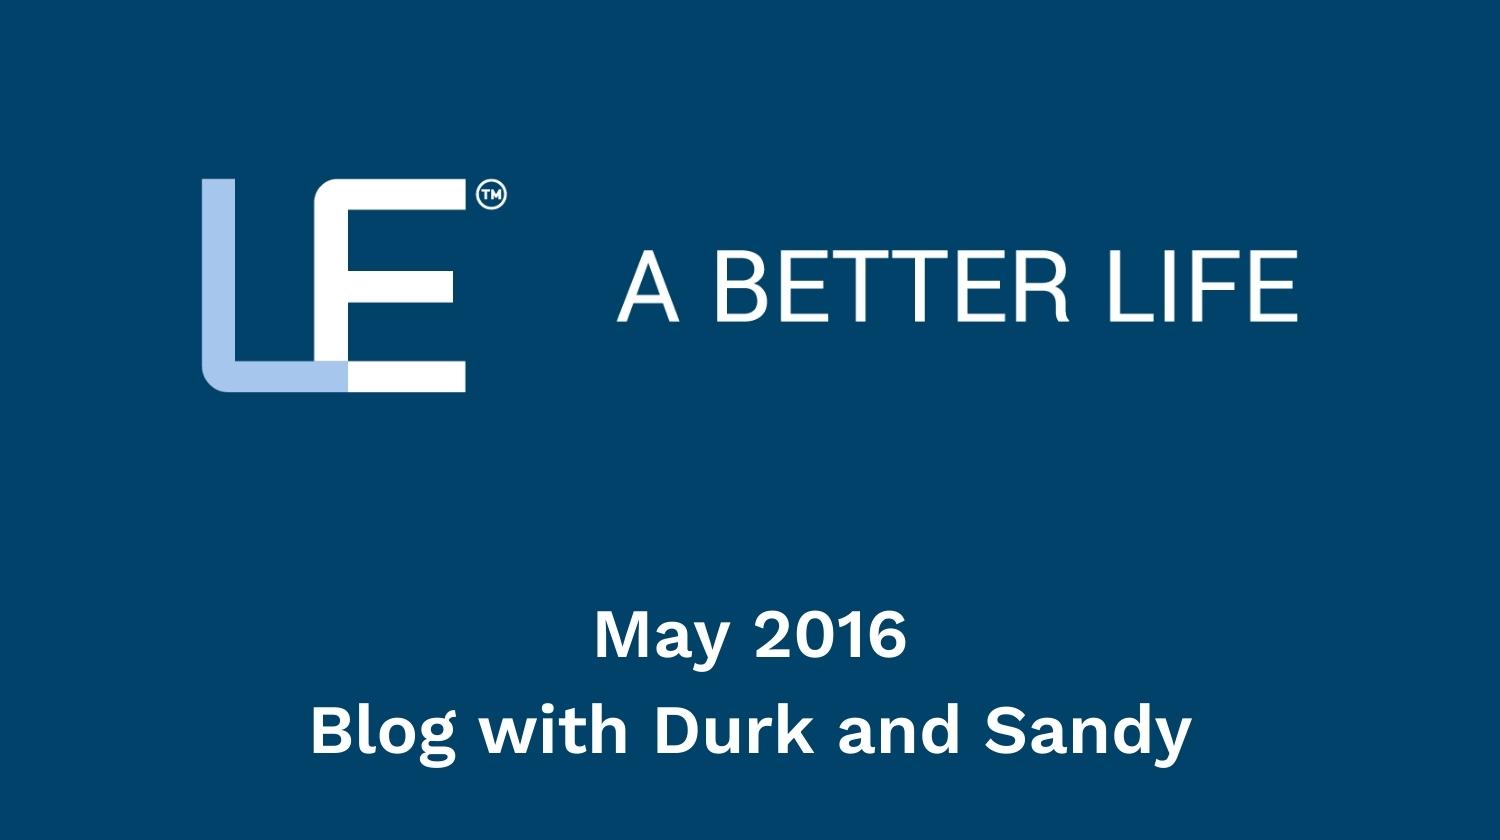 May 2016 Blog with Durk and Sandy